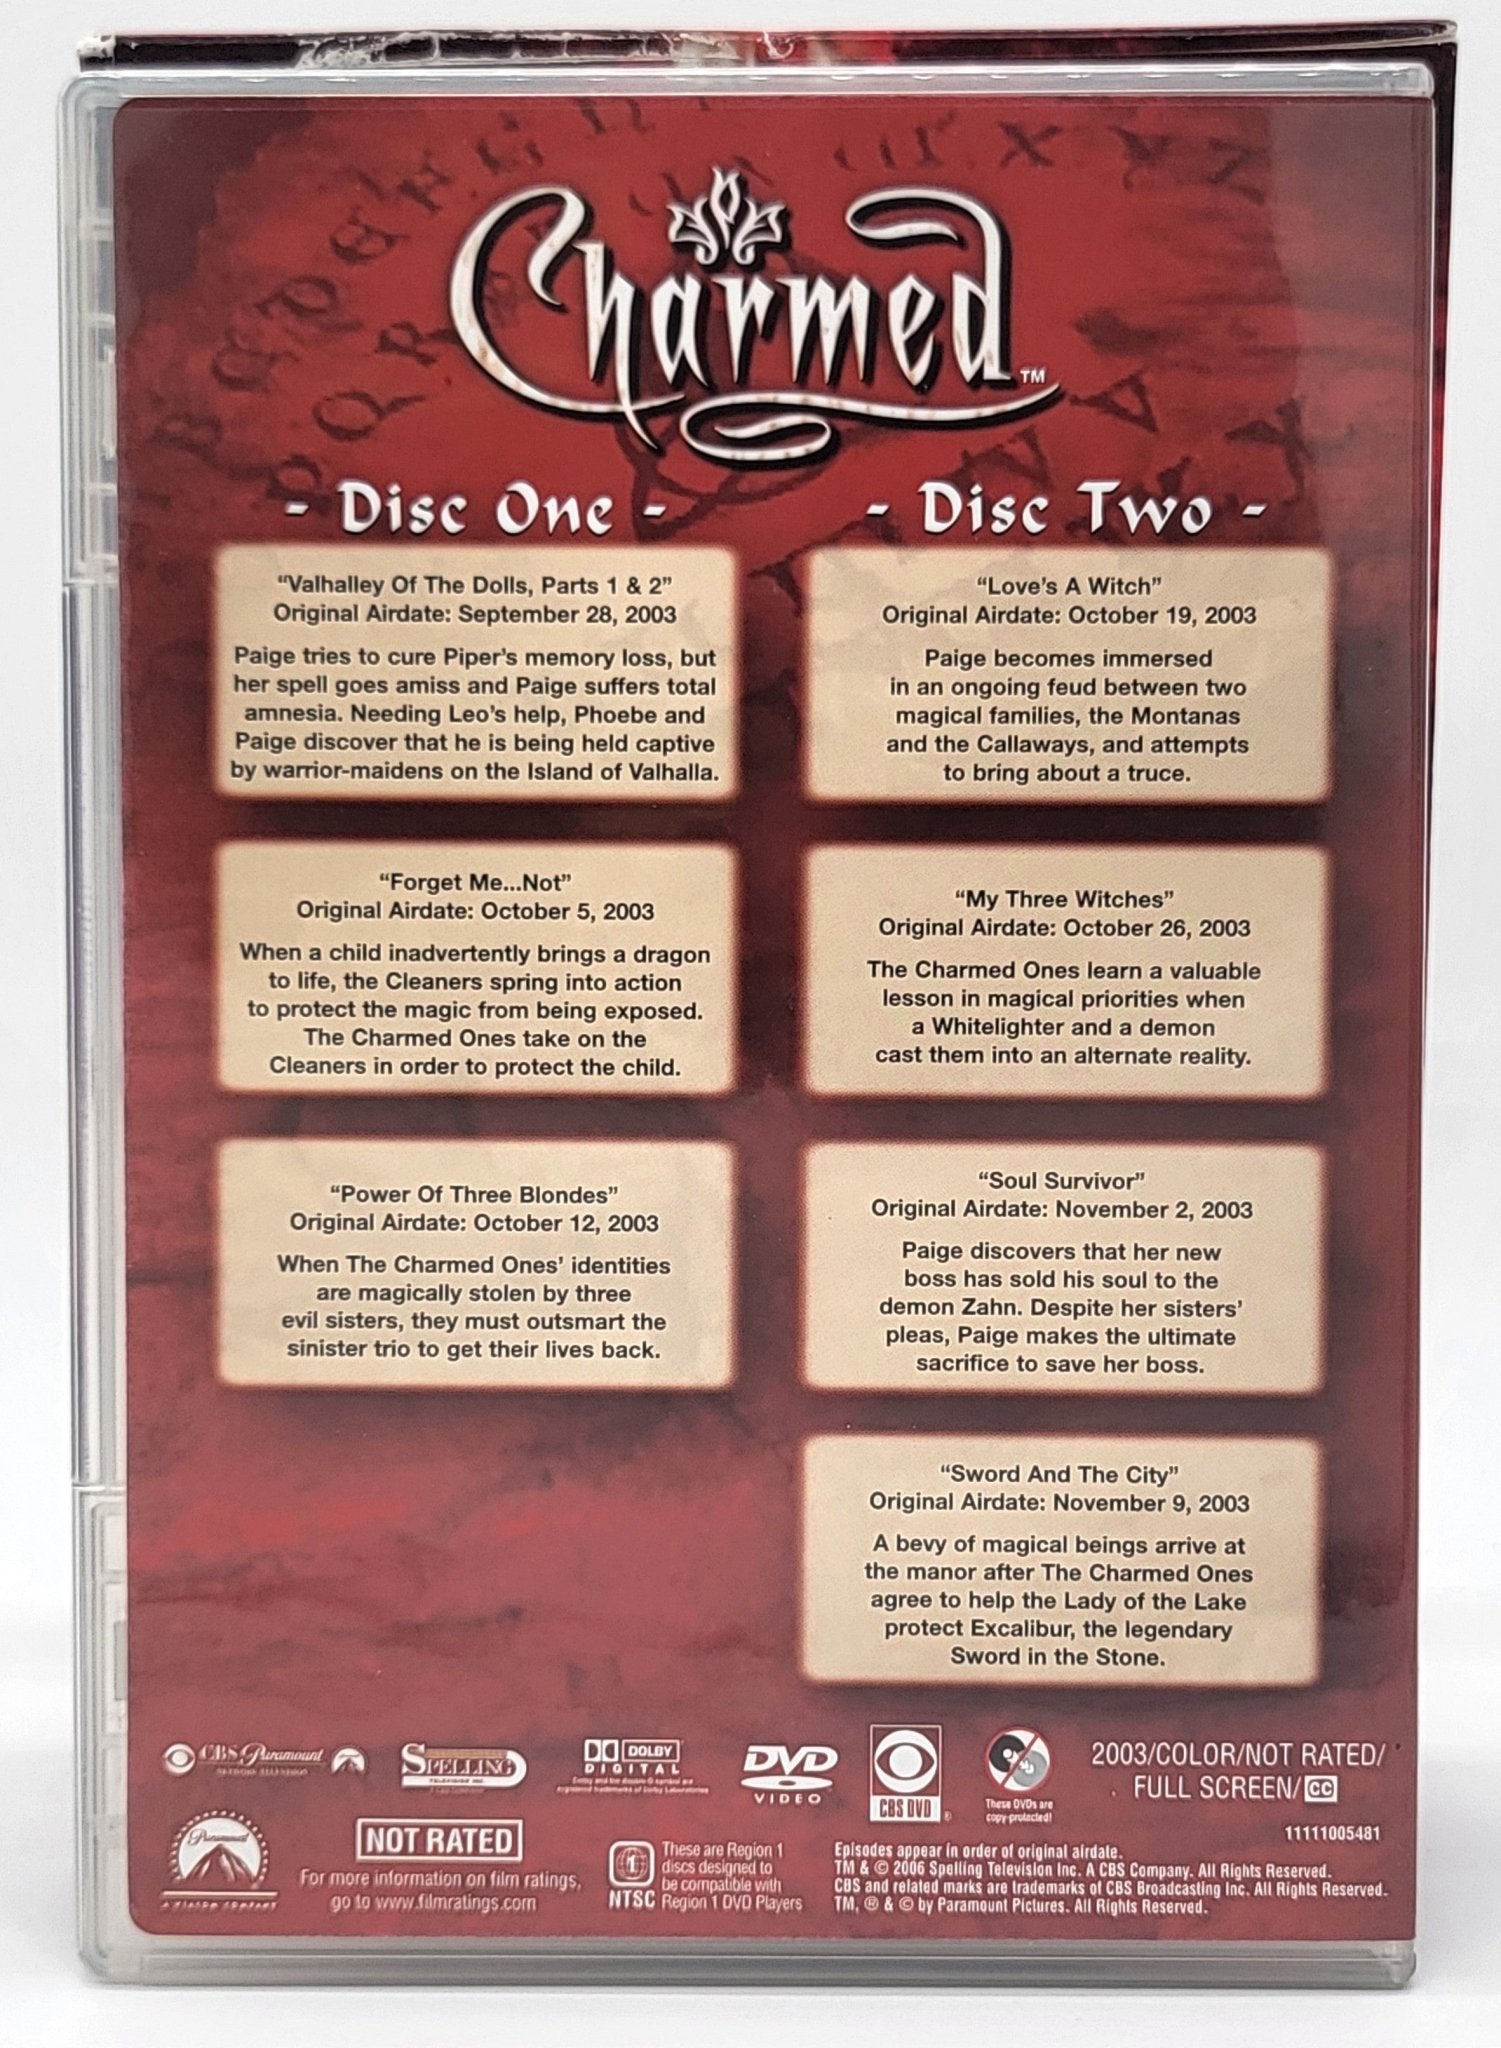 Paramount Pictures Home Entertainment - Charmed | DVD | The Complete Sixth Season - DVD - Steady Bunny Shop